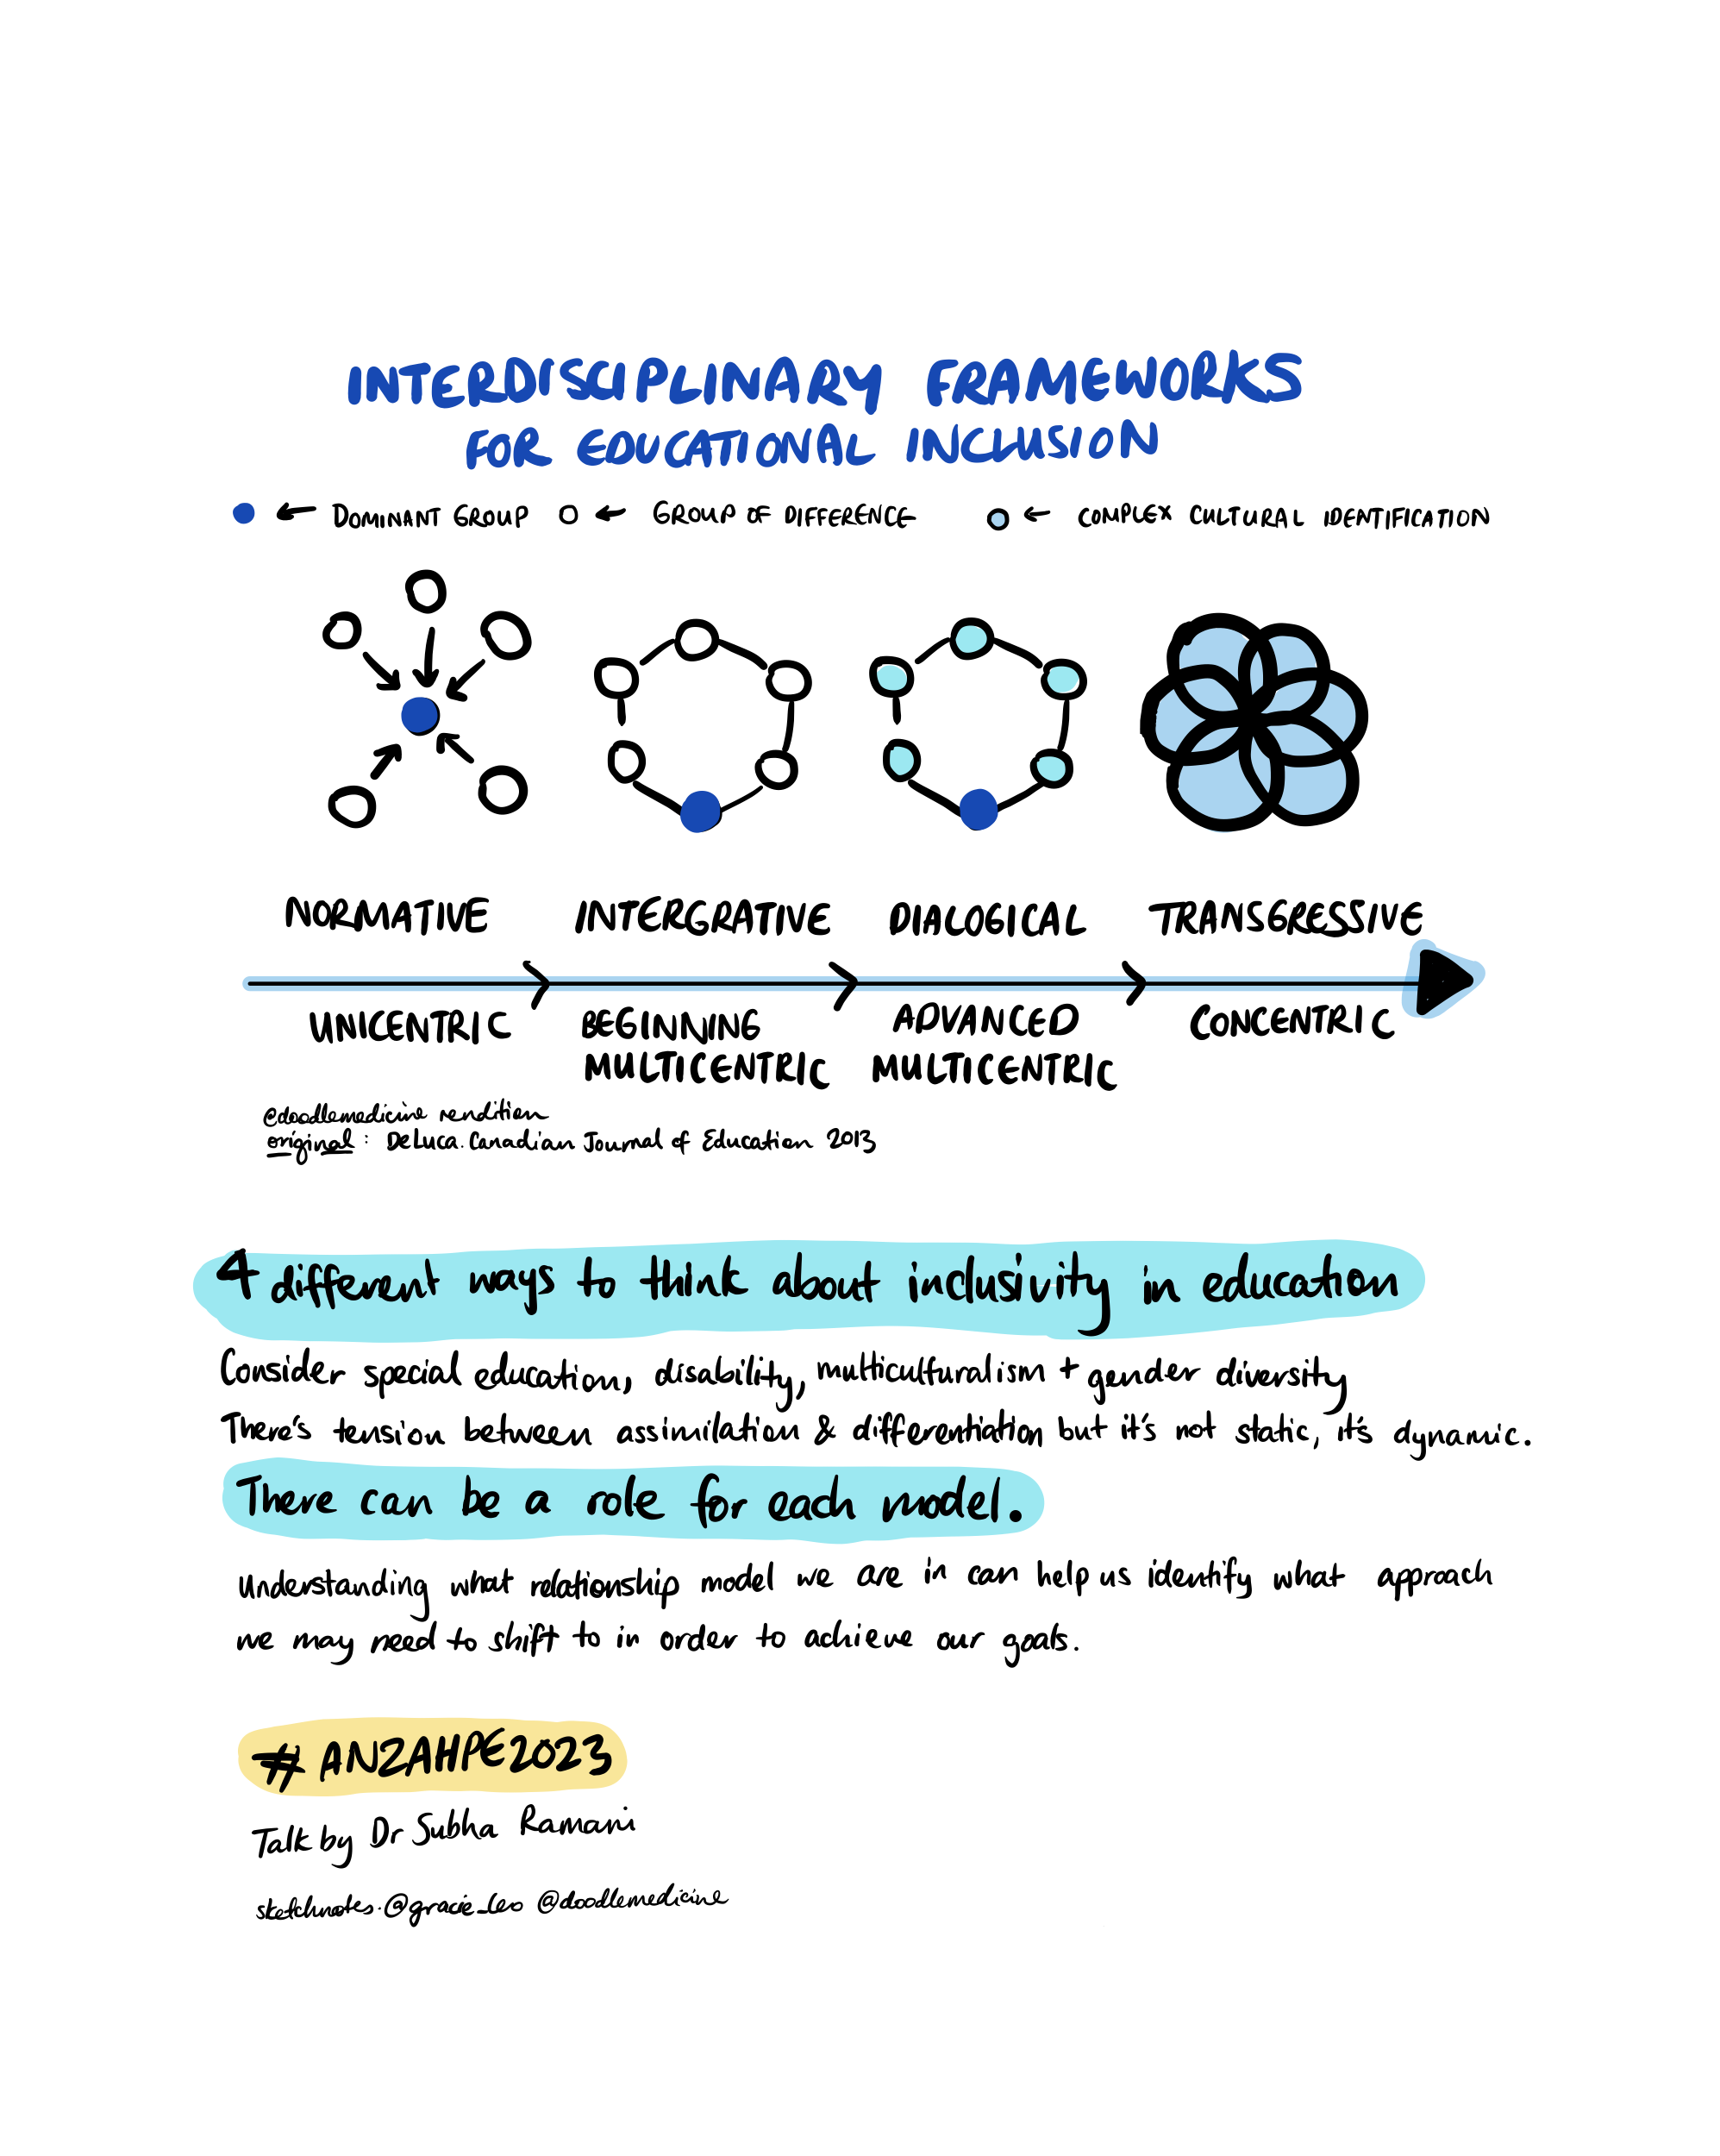 ANZAHPE Sketchnote on Interdisciplinary Frameworks for Educational Inclusion